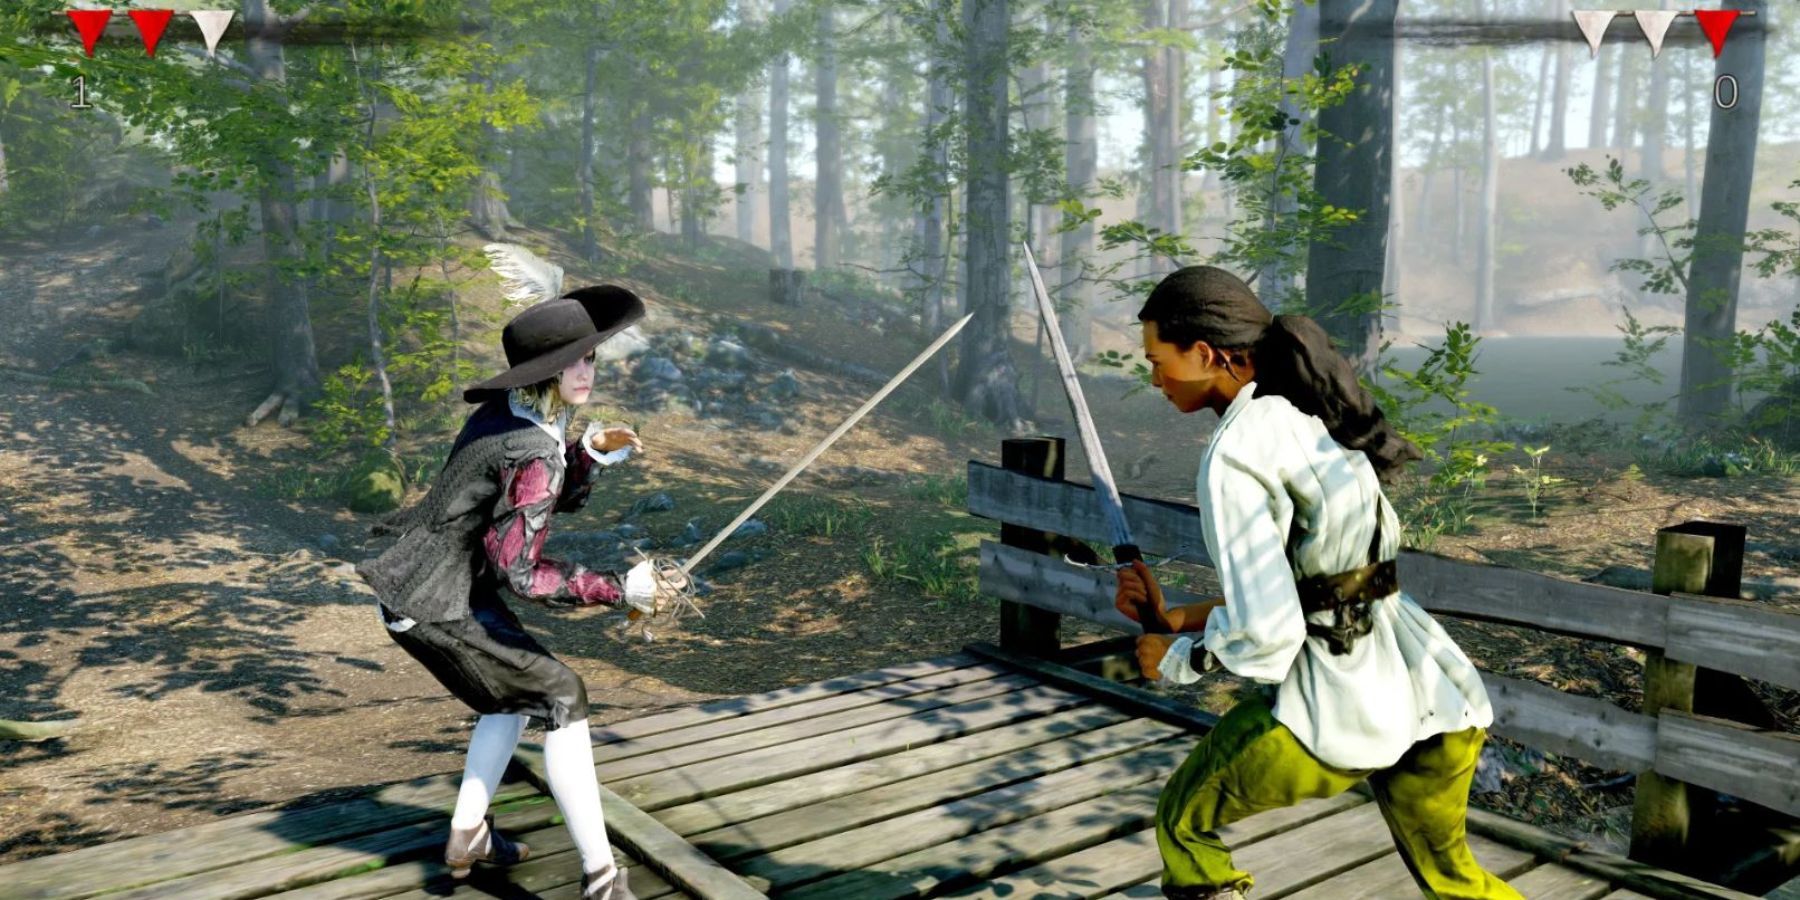 two swordsmen engaged in a duel